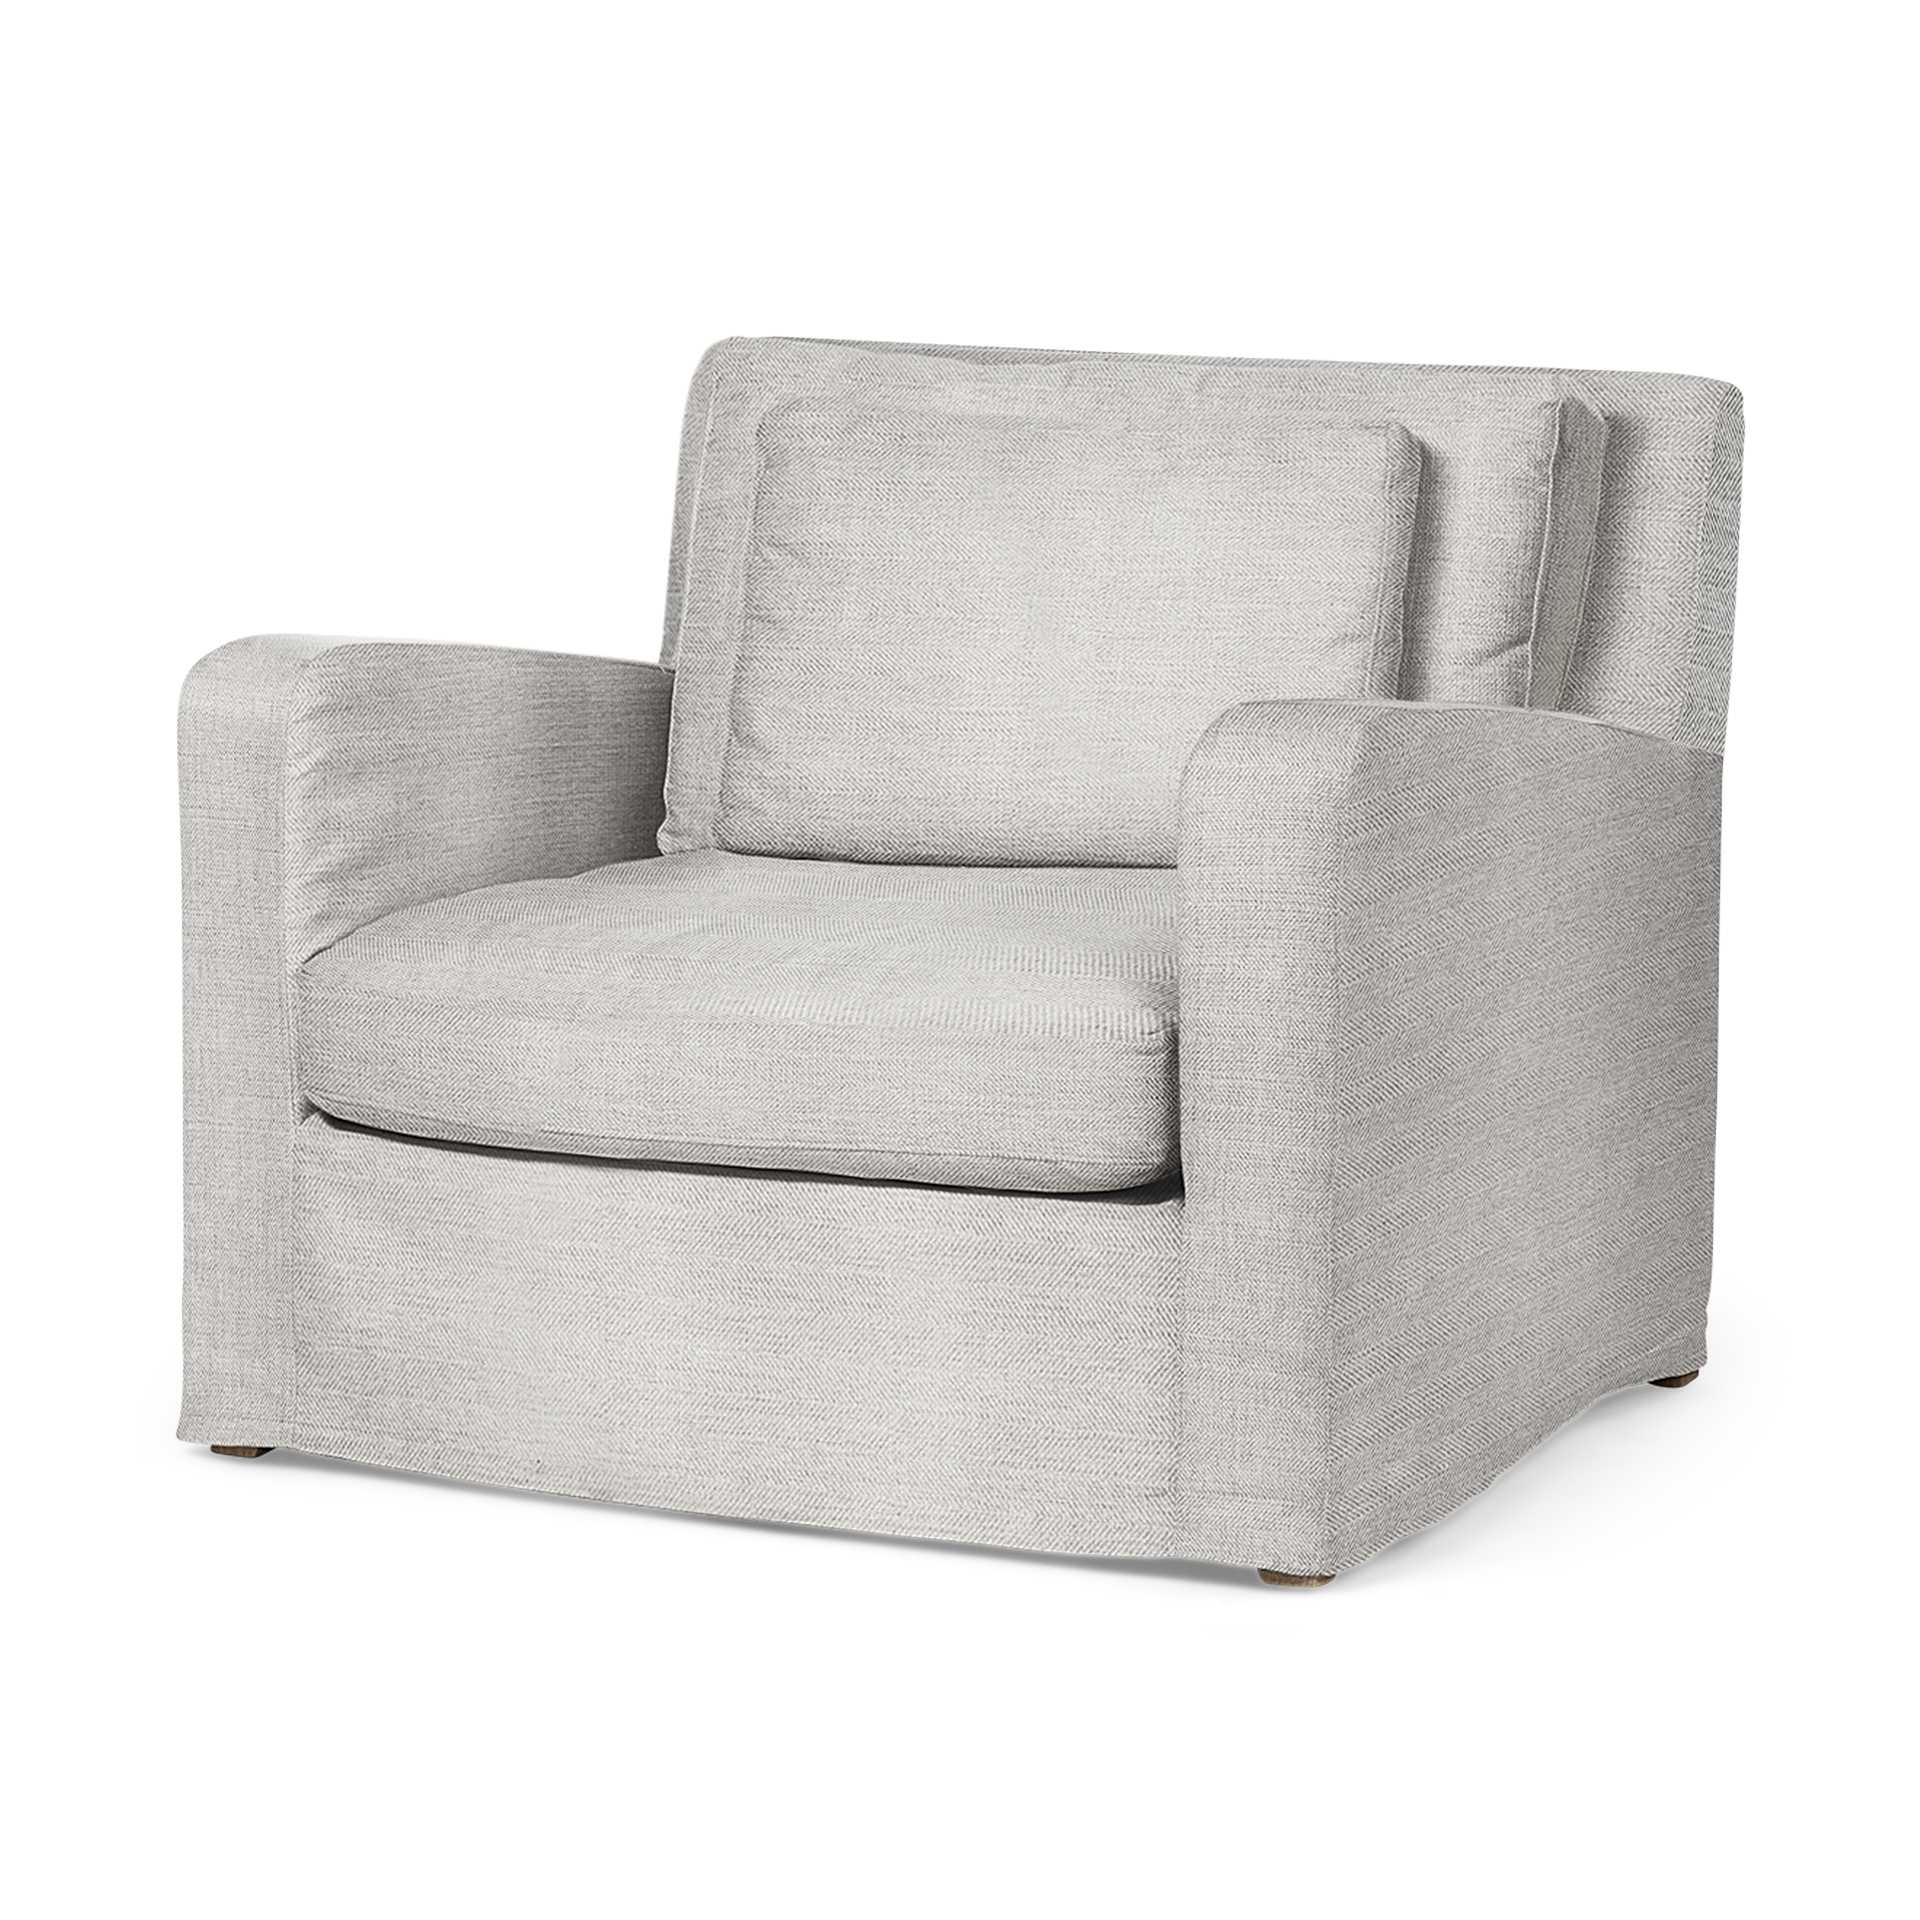 Frost Gray Slipcover Upholstered Fabric Seating Wide Accent chair w/ Wooden Frame and Legs